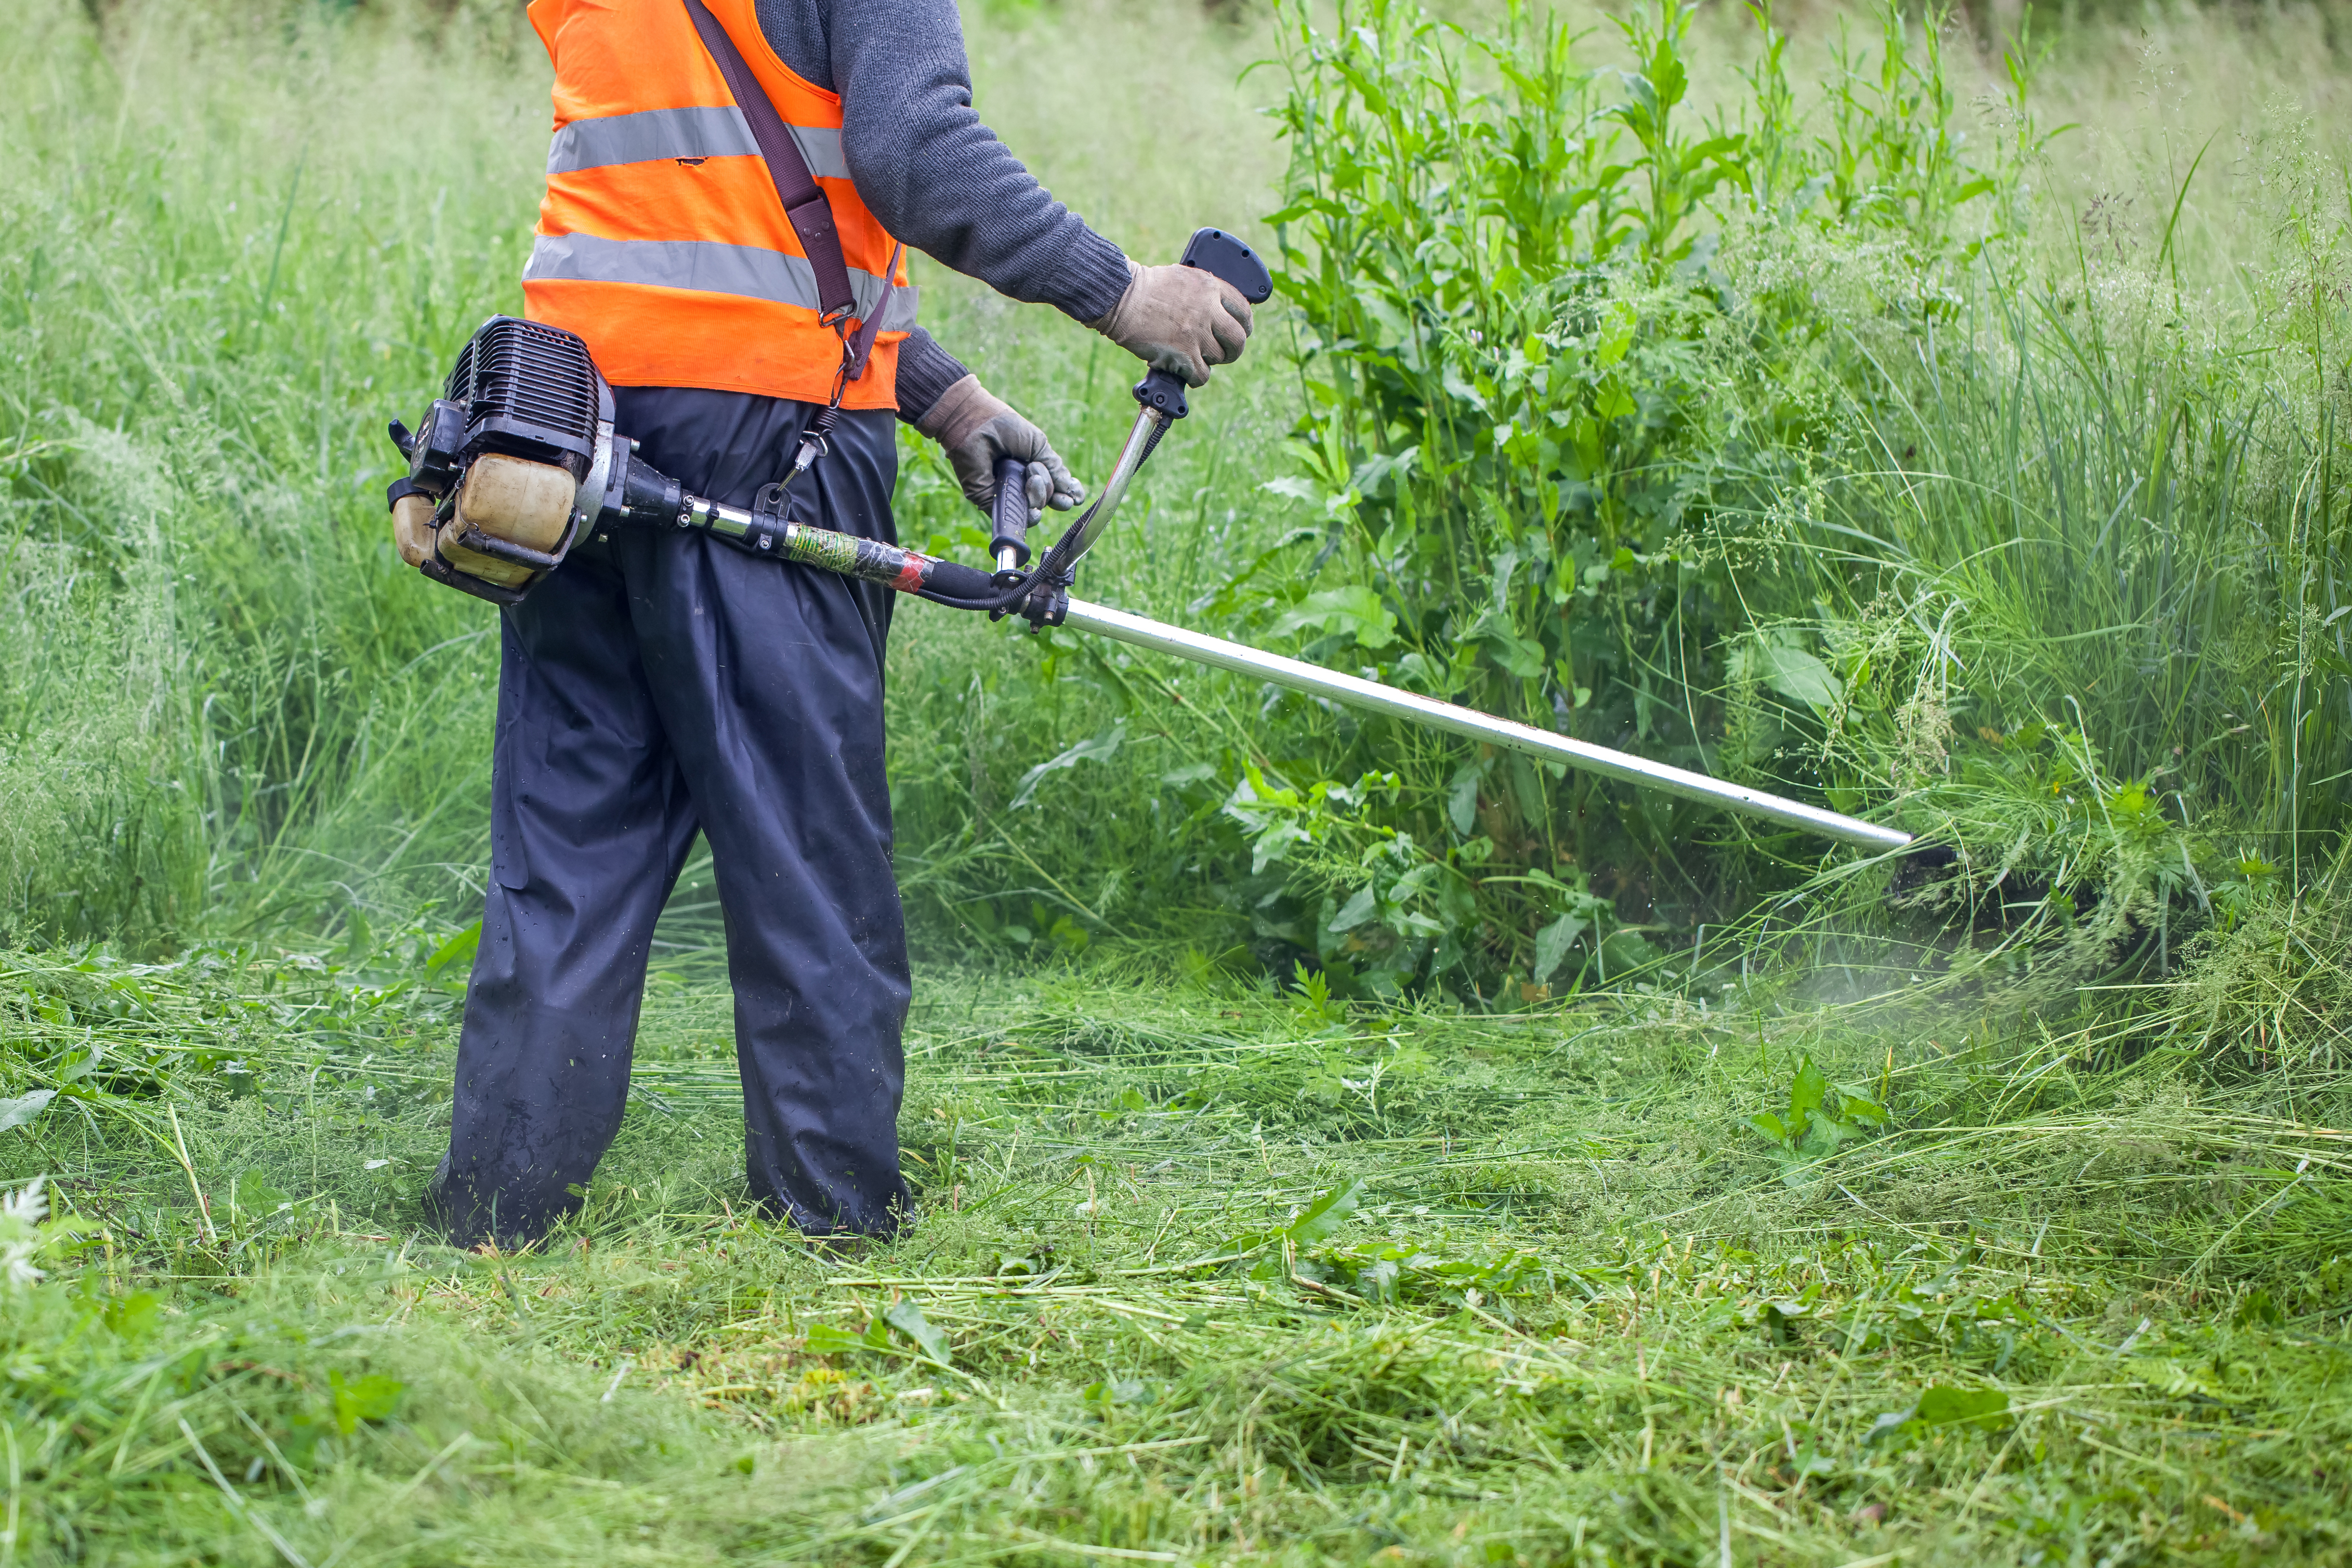 A person in an orange high-visibility vest and blue trousers whipper snips some long grass and weeds.